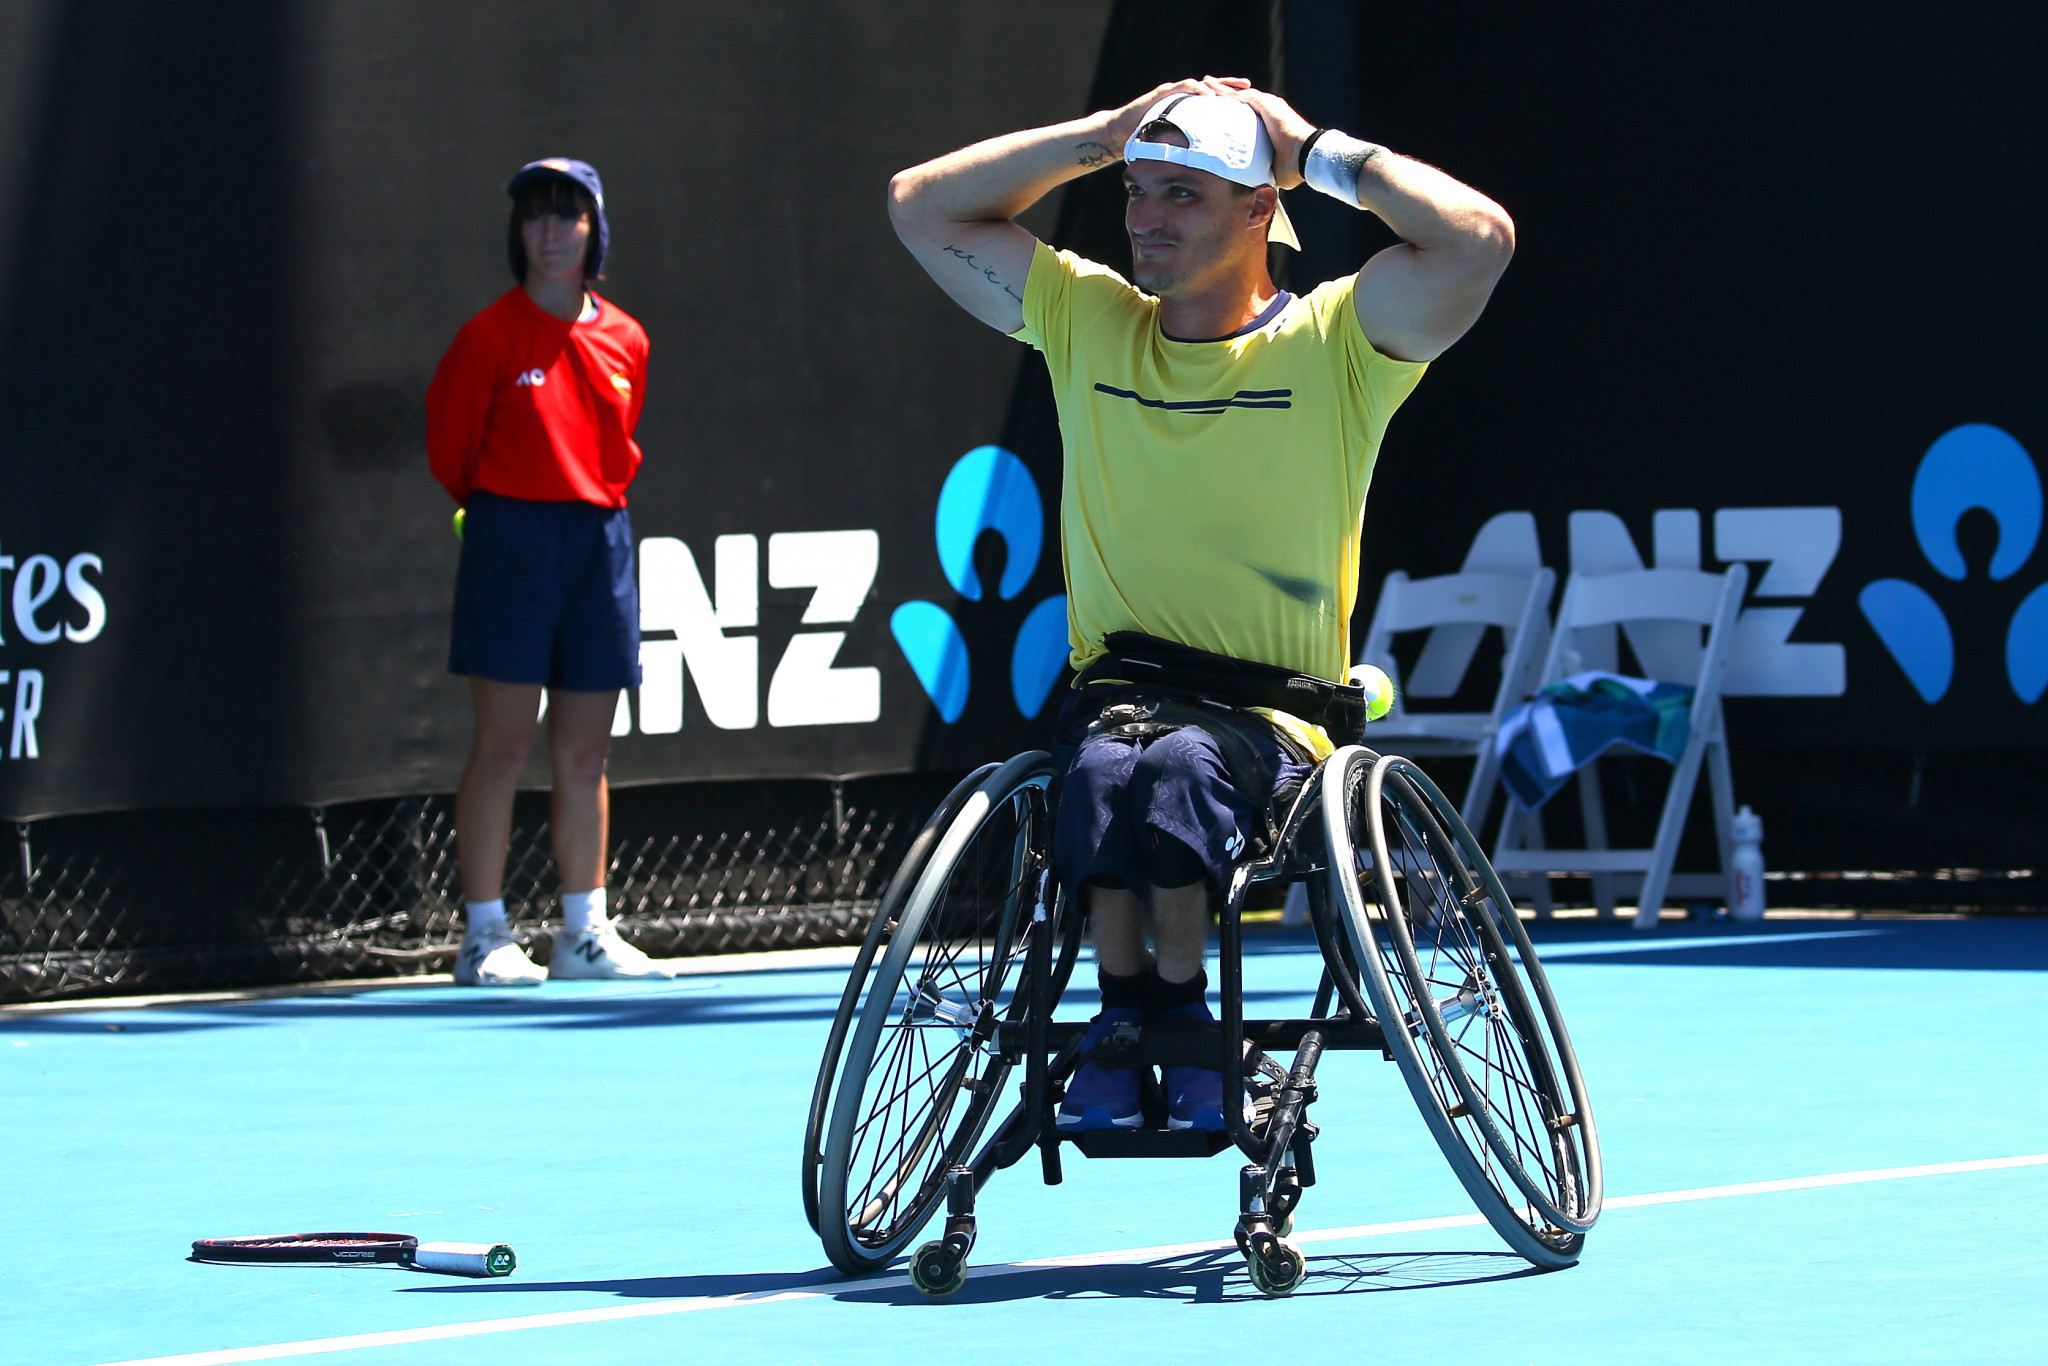 Argentina's Gustavo Fernandez won the men's wheelchair singles title at the Australian Open in Melbourne and then described it as 